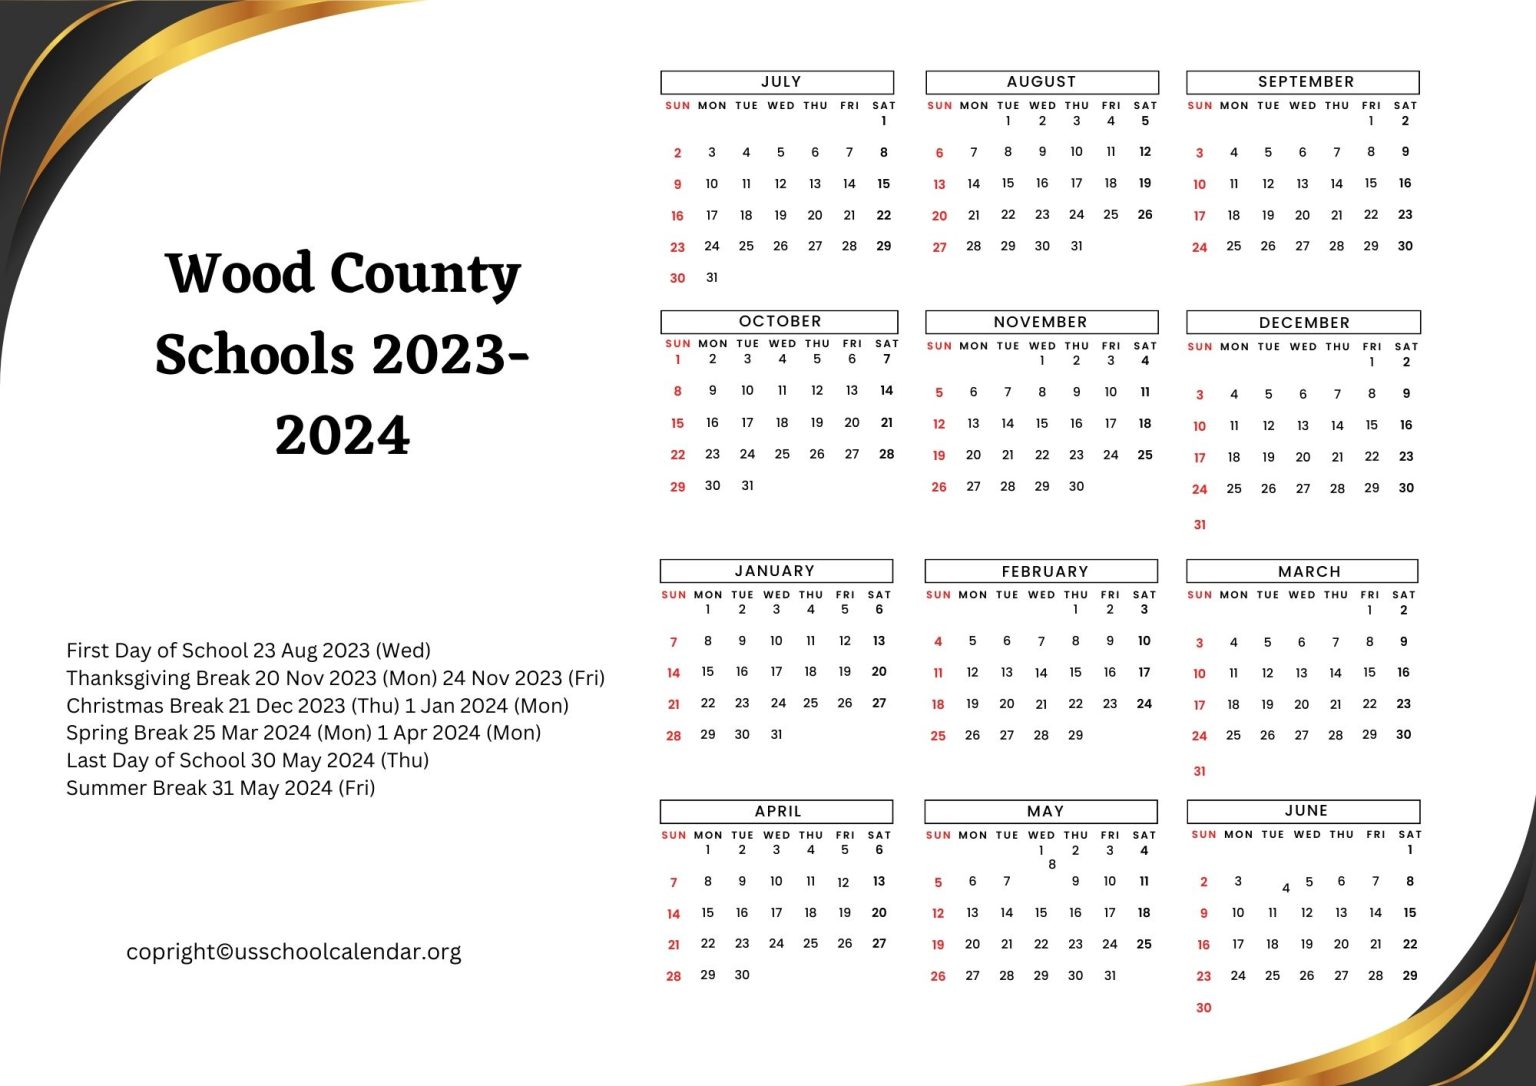 Wood County Schools Calendar with Holidays 2023 2024